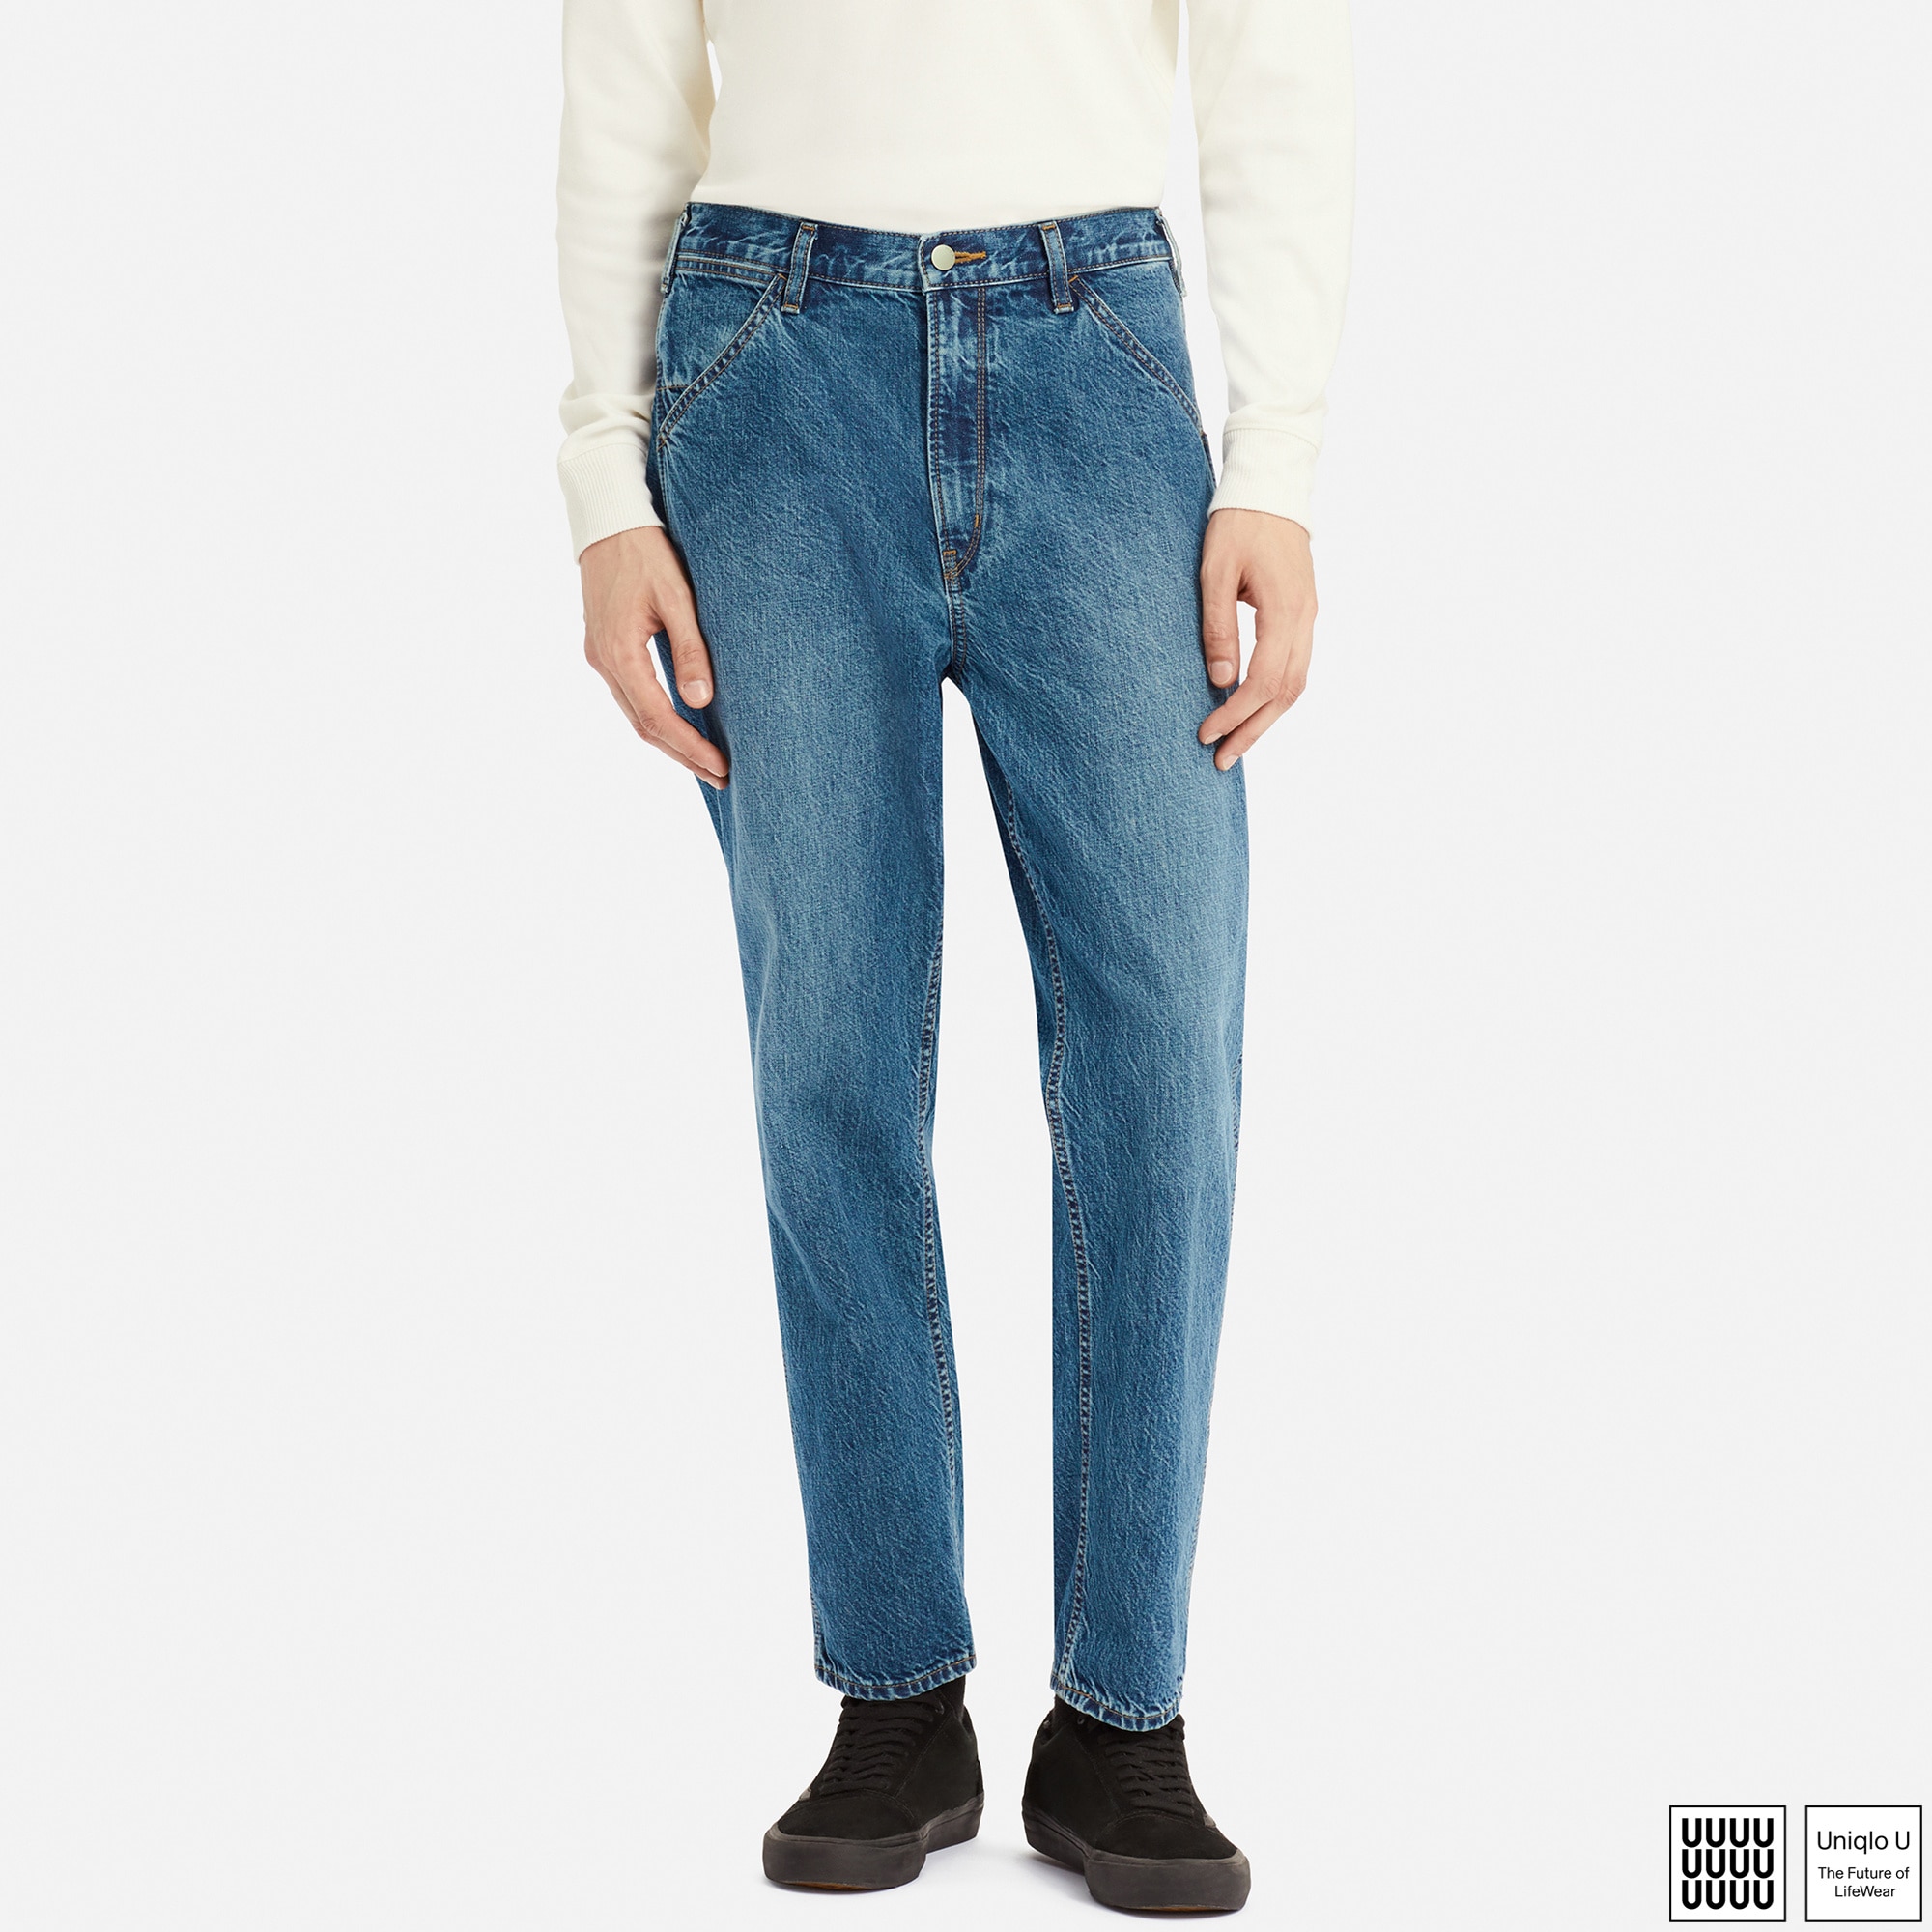 uniqlo wide fit tapered jeans